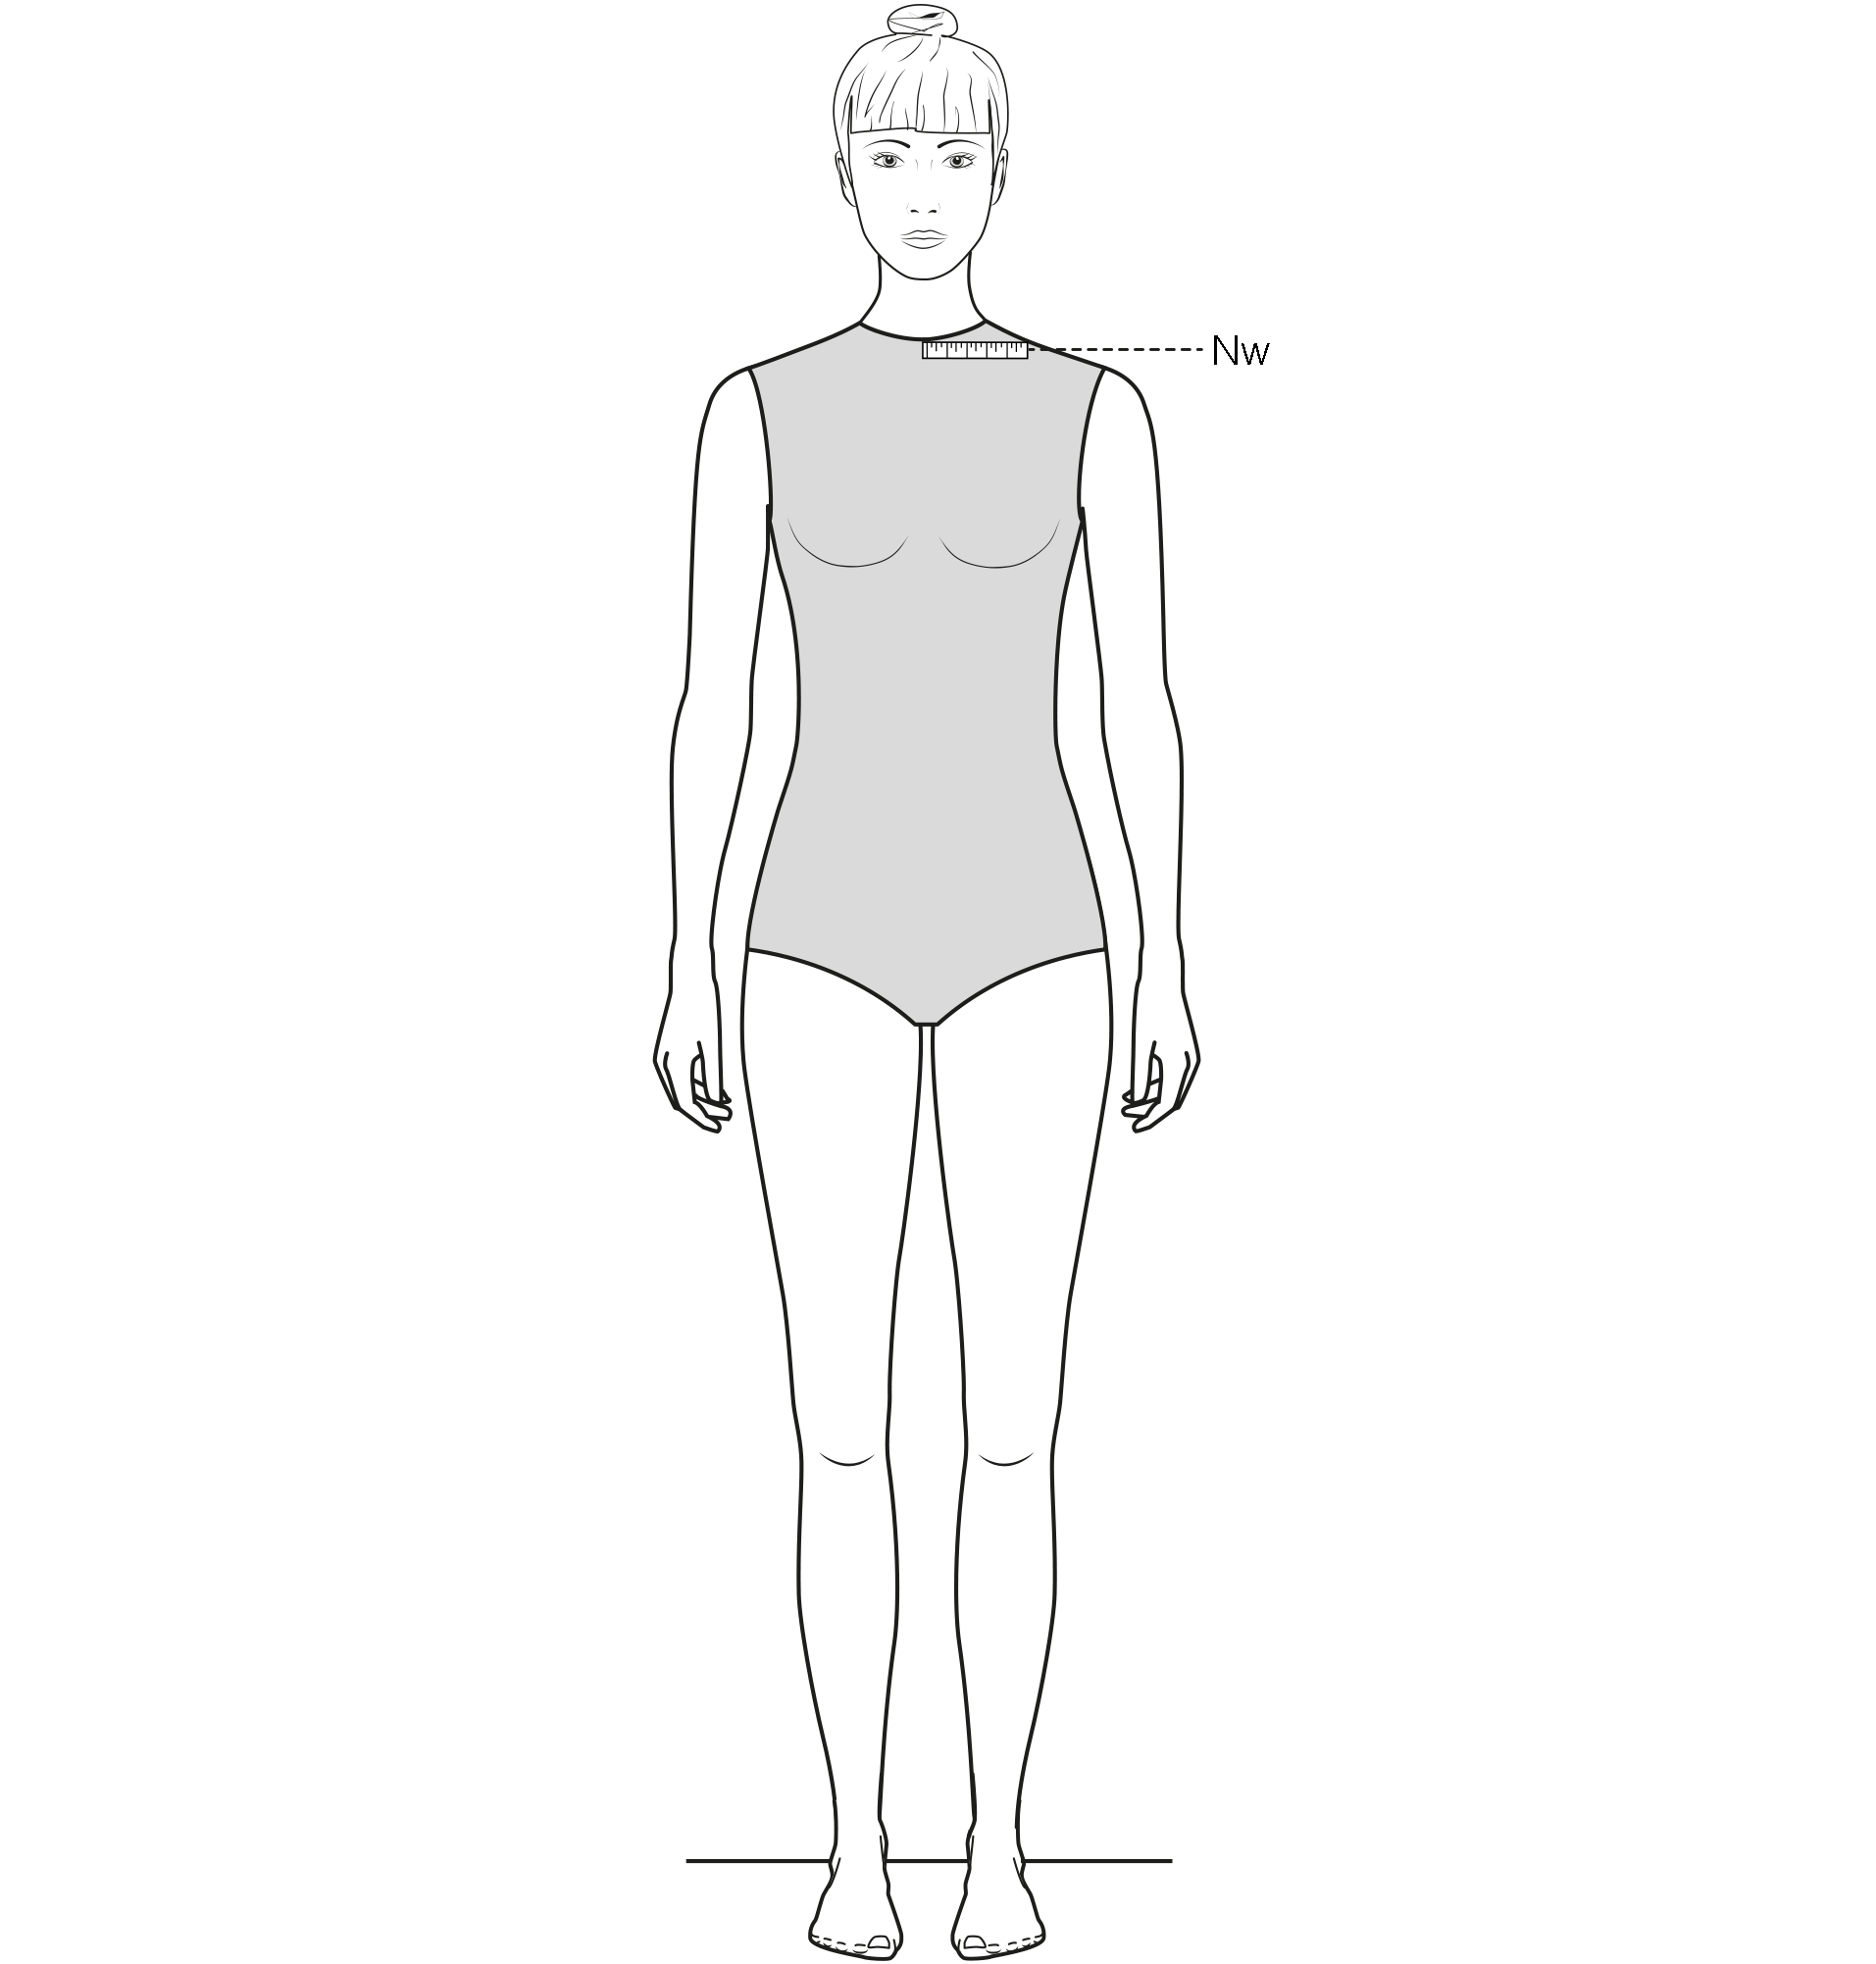 This figure shows the measurement of the Neck width.